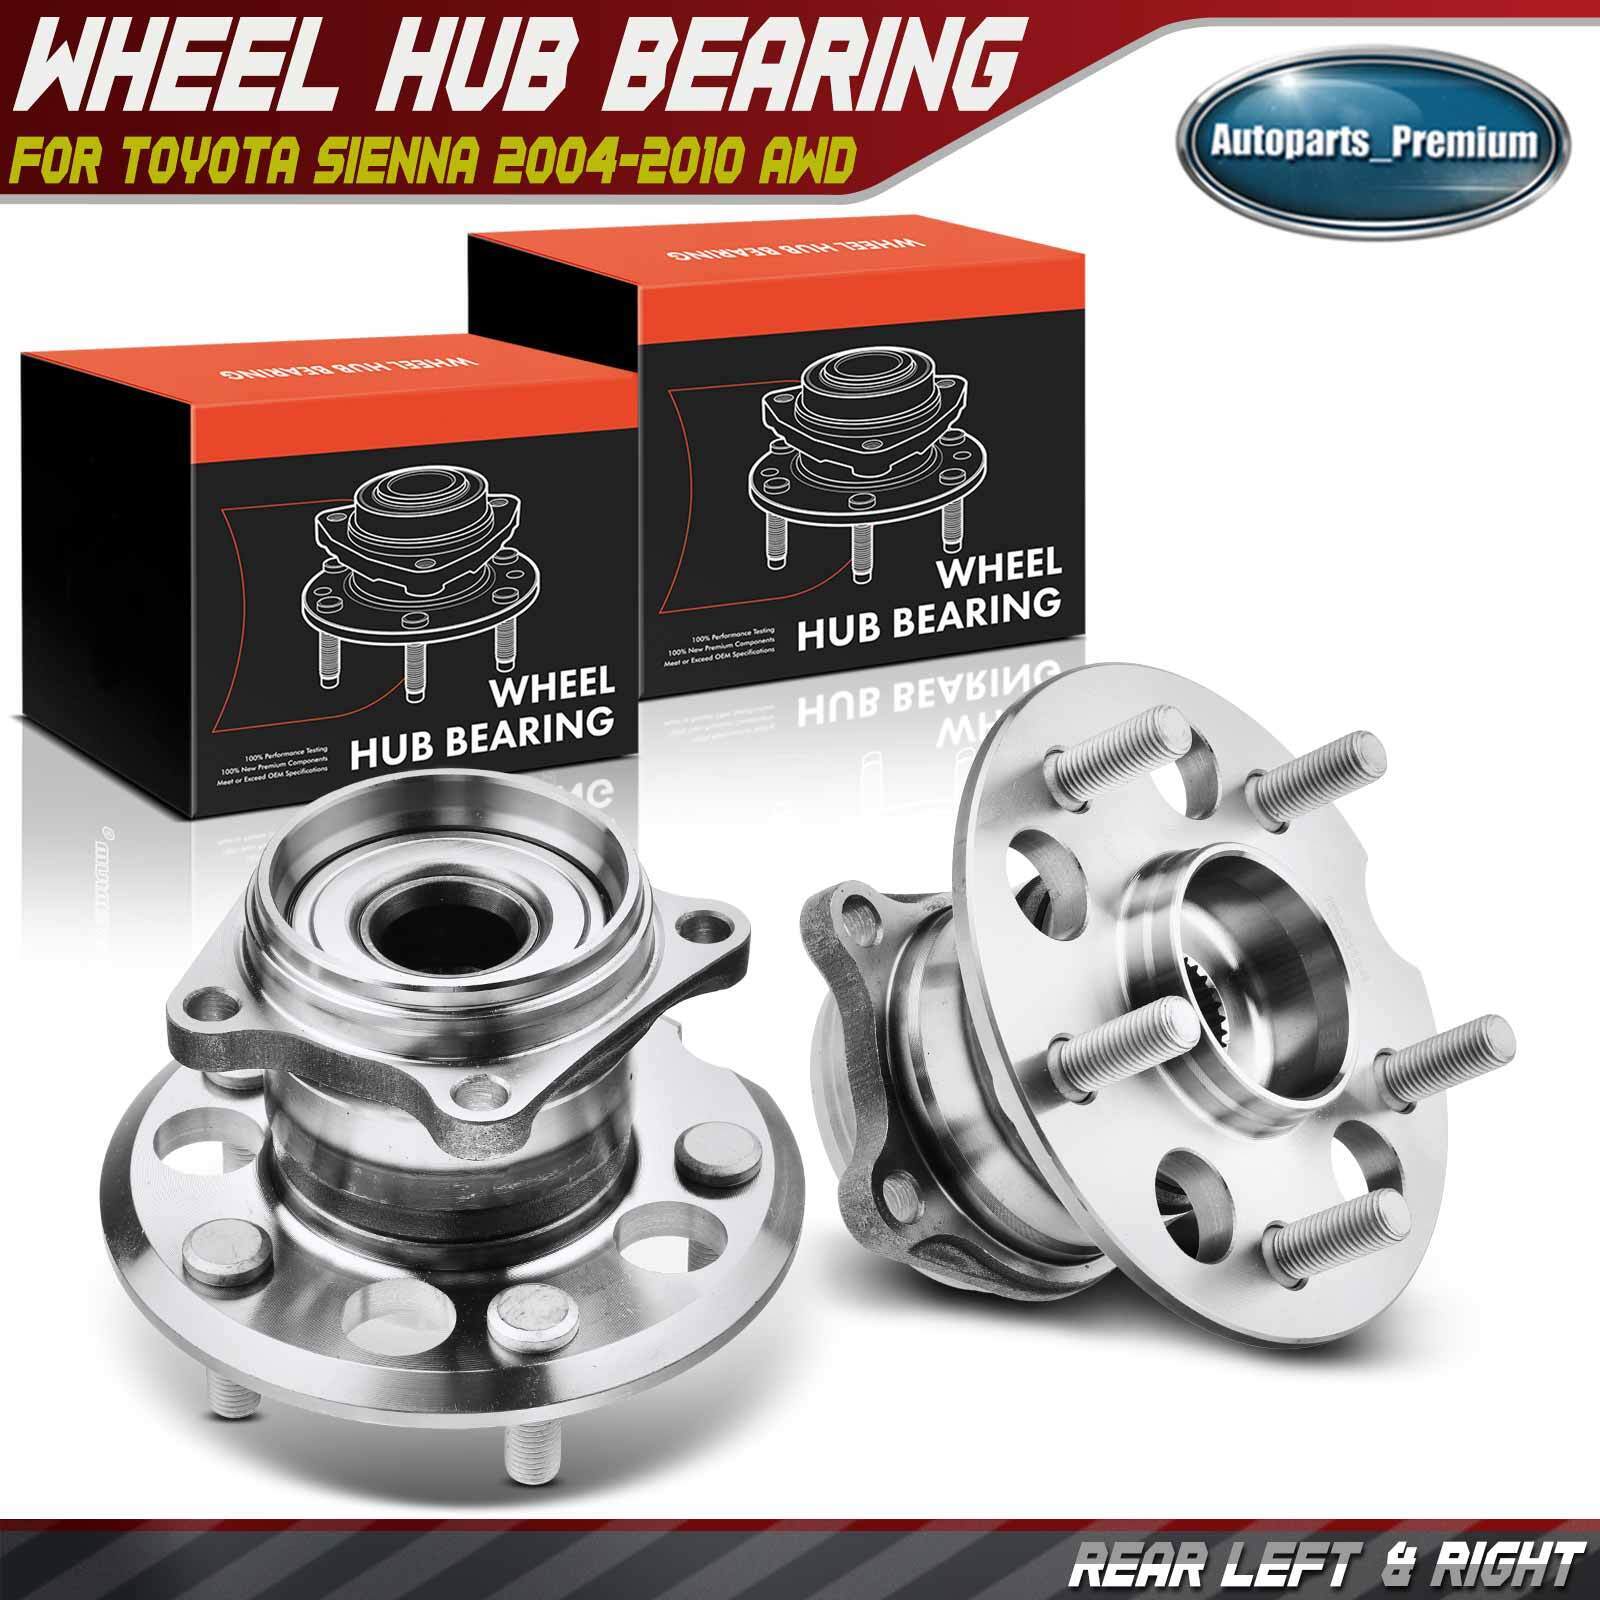 Rear LH & RH Wheel Bearing Hub Assembly for Toyota Sienna 2004-2010 AWD Non-ABS